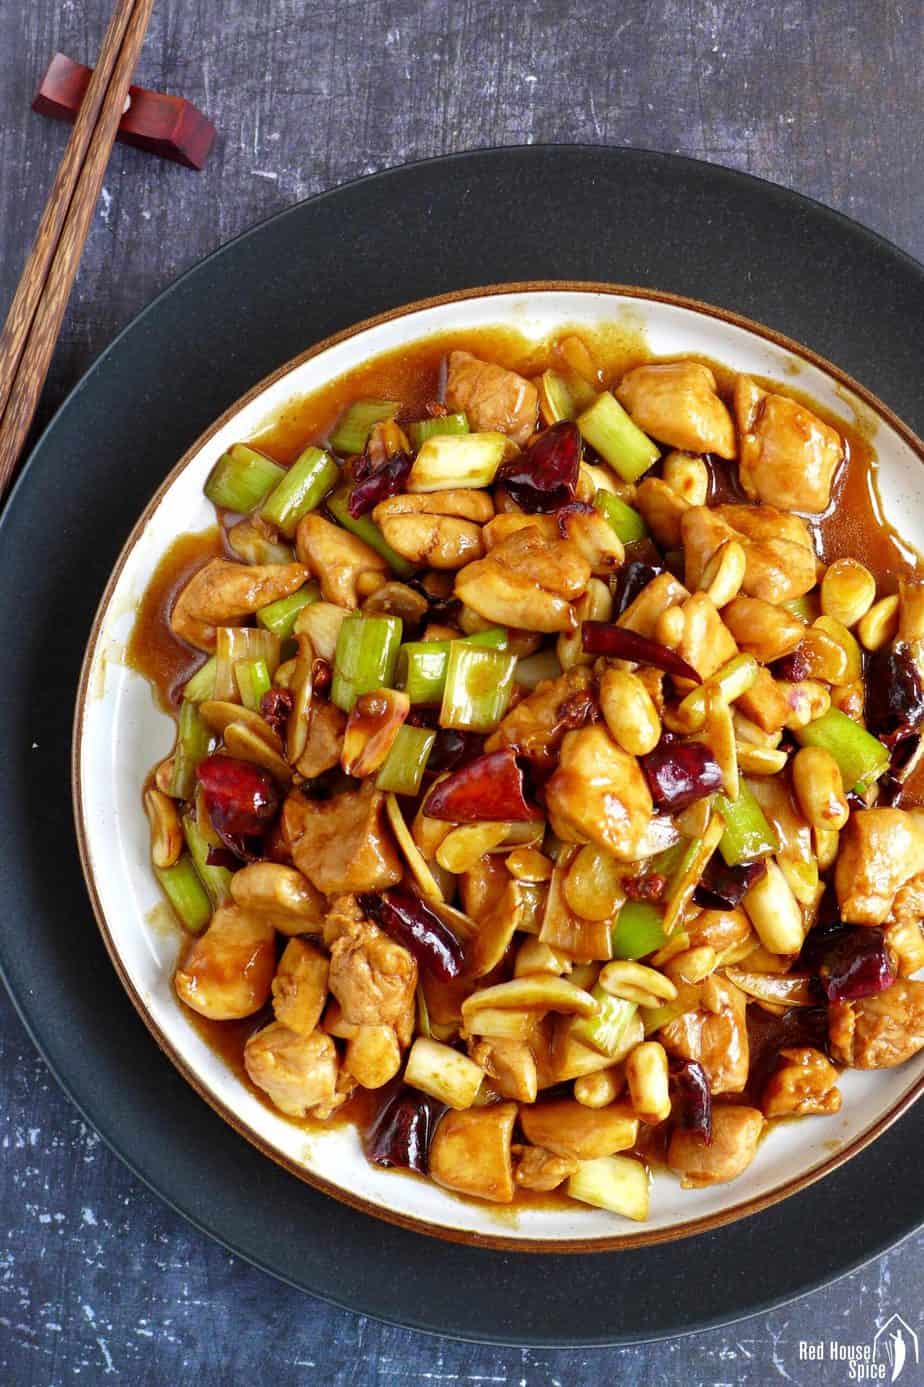 A plate of Kung Pao chicken